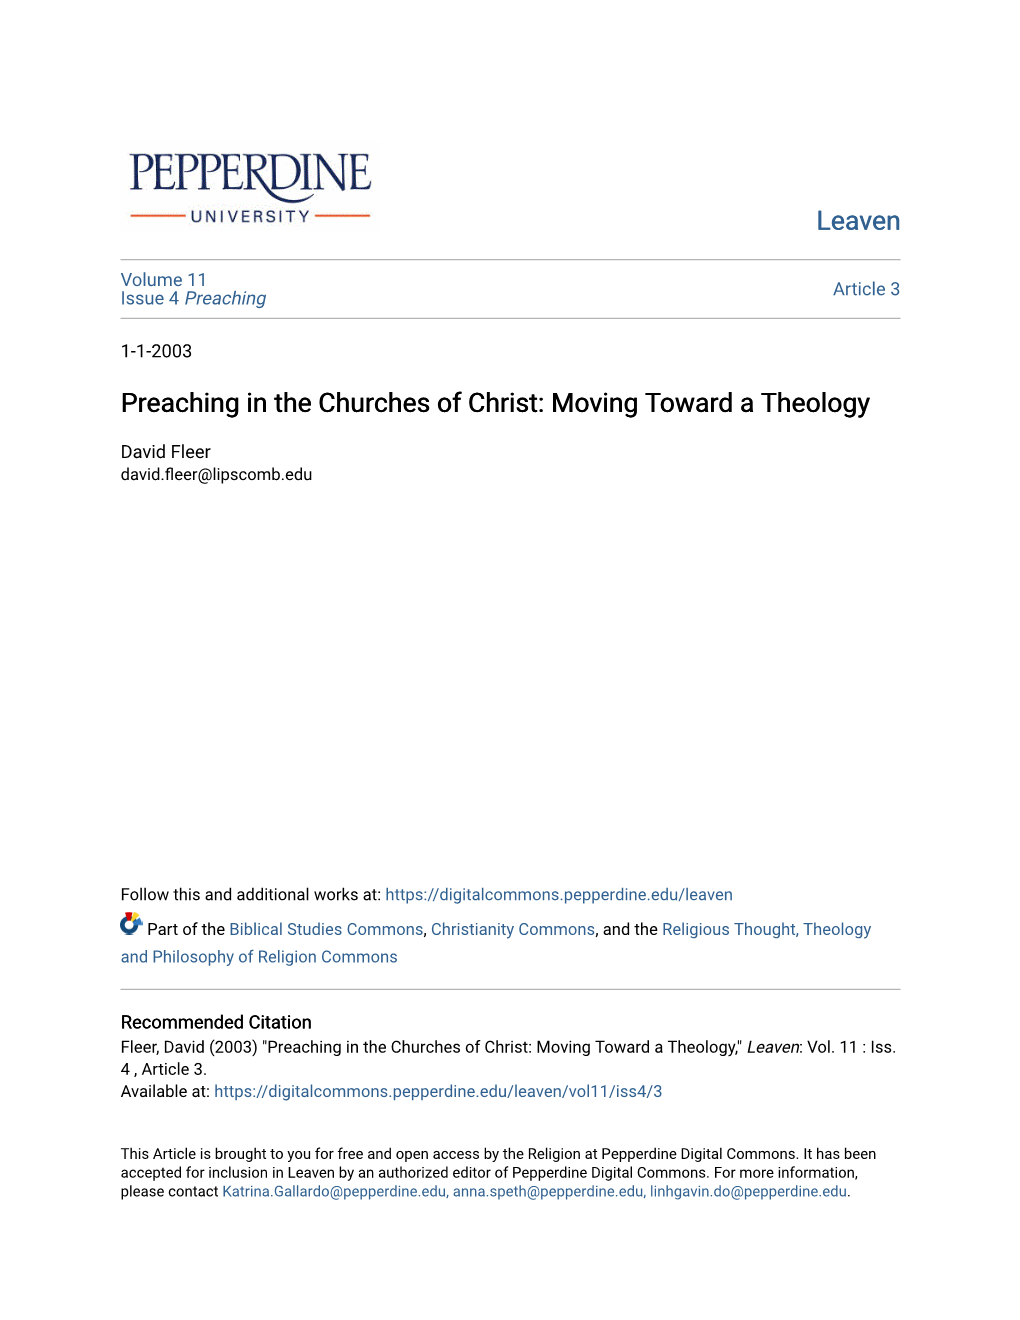 Preaching in the Churches of Christ: Moving Toward a Theology